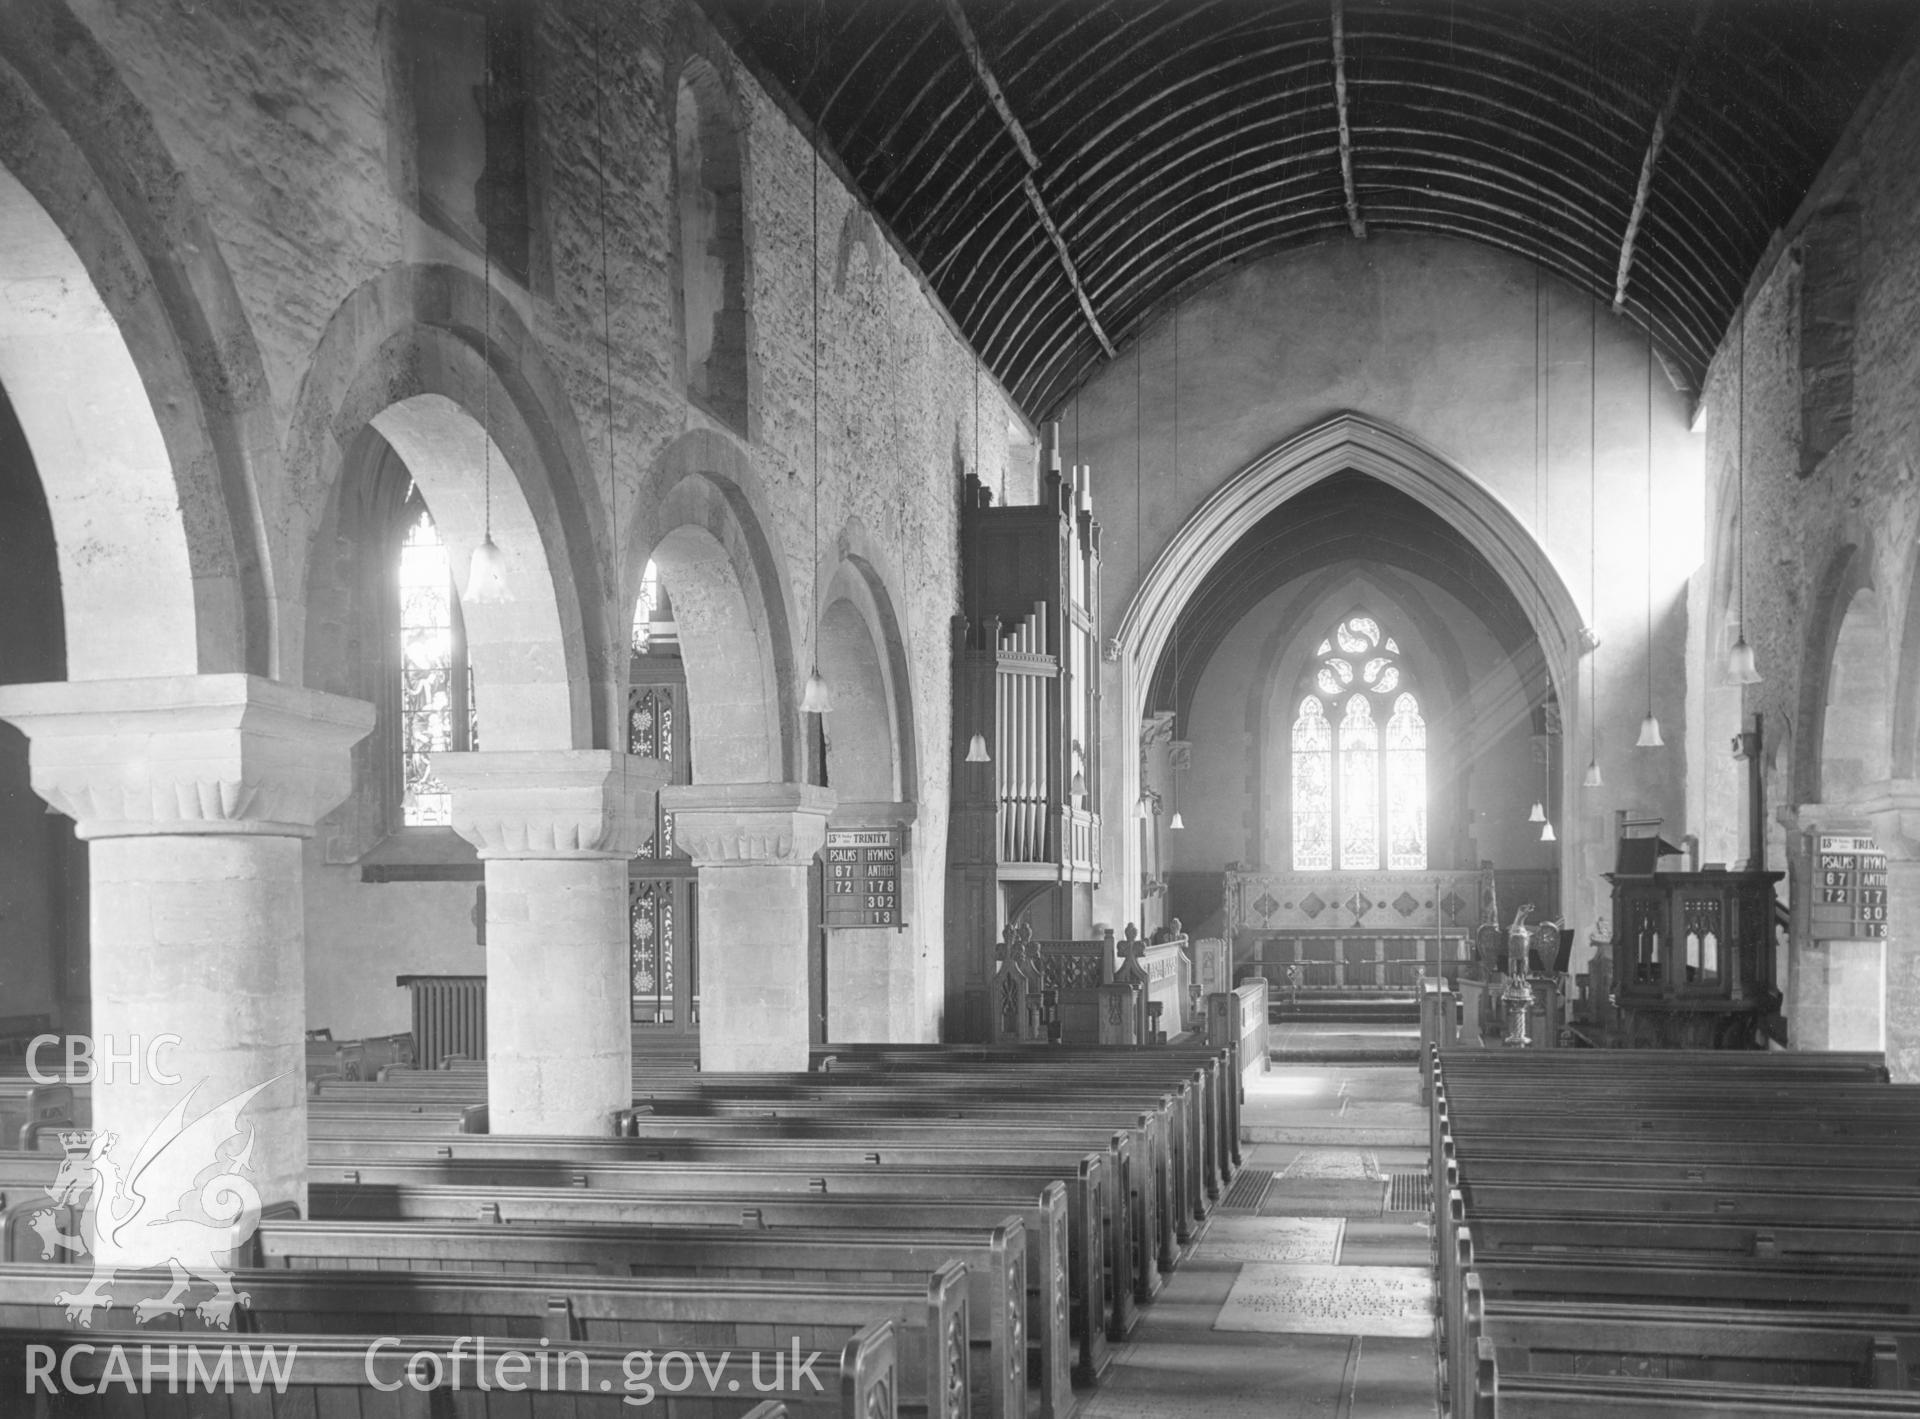 1 b/w print showing interior view of St Woolas Cathedral, Newport, collated by the former Central Office of Information.